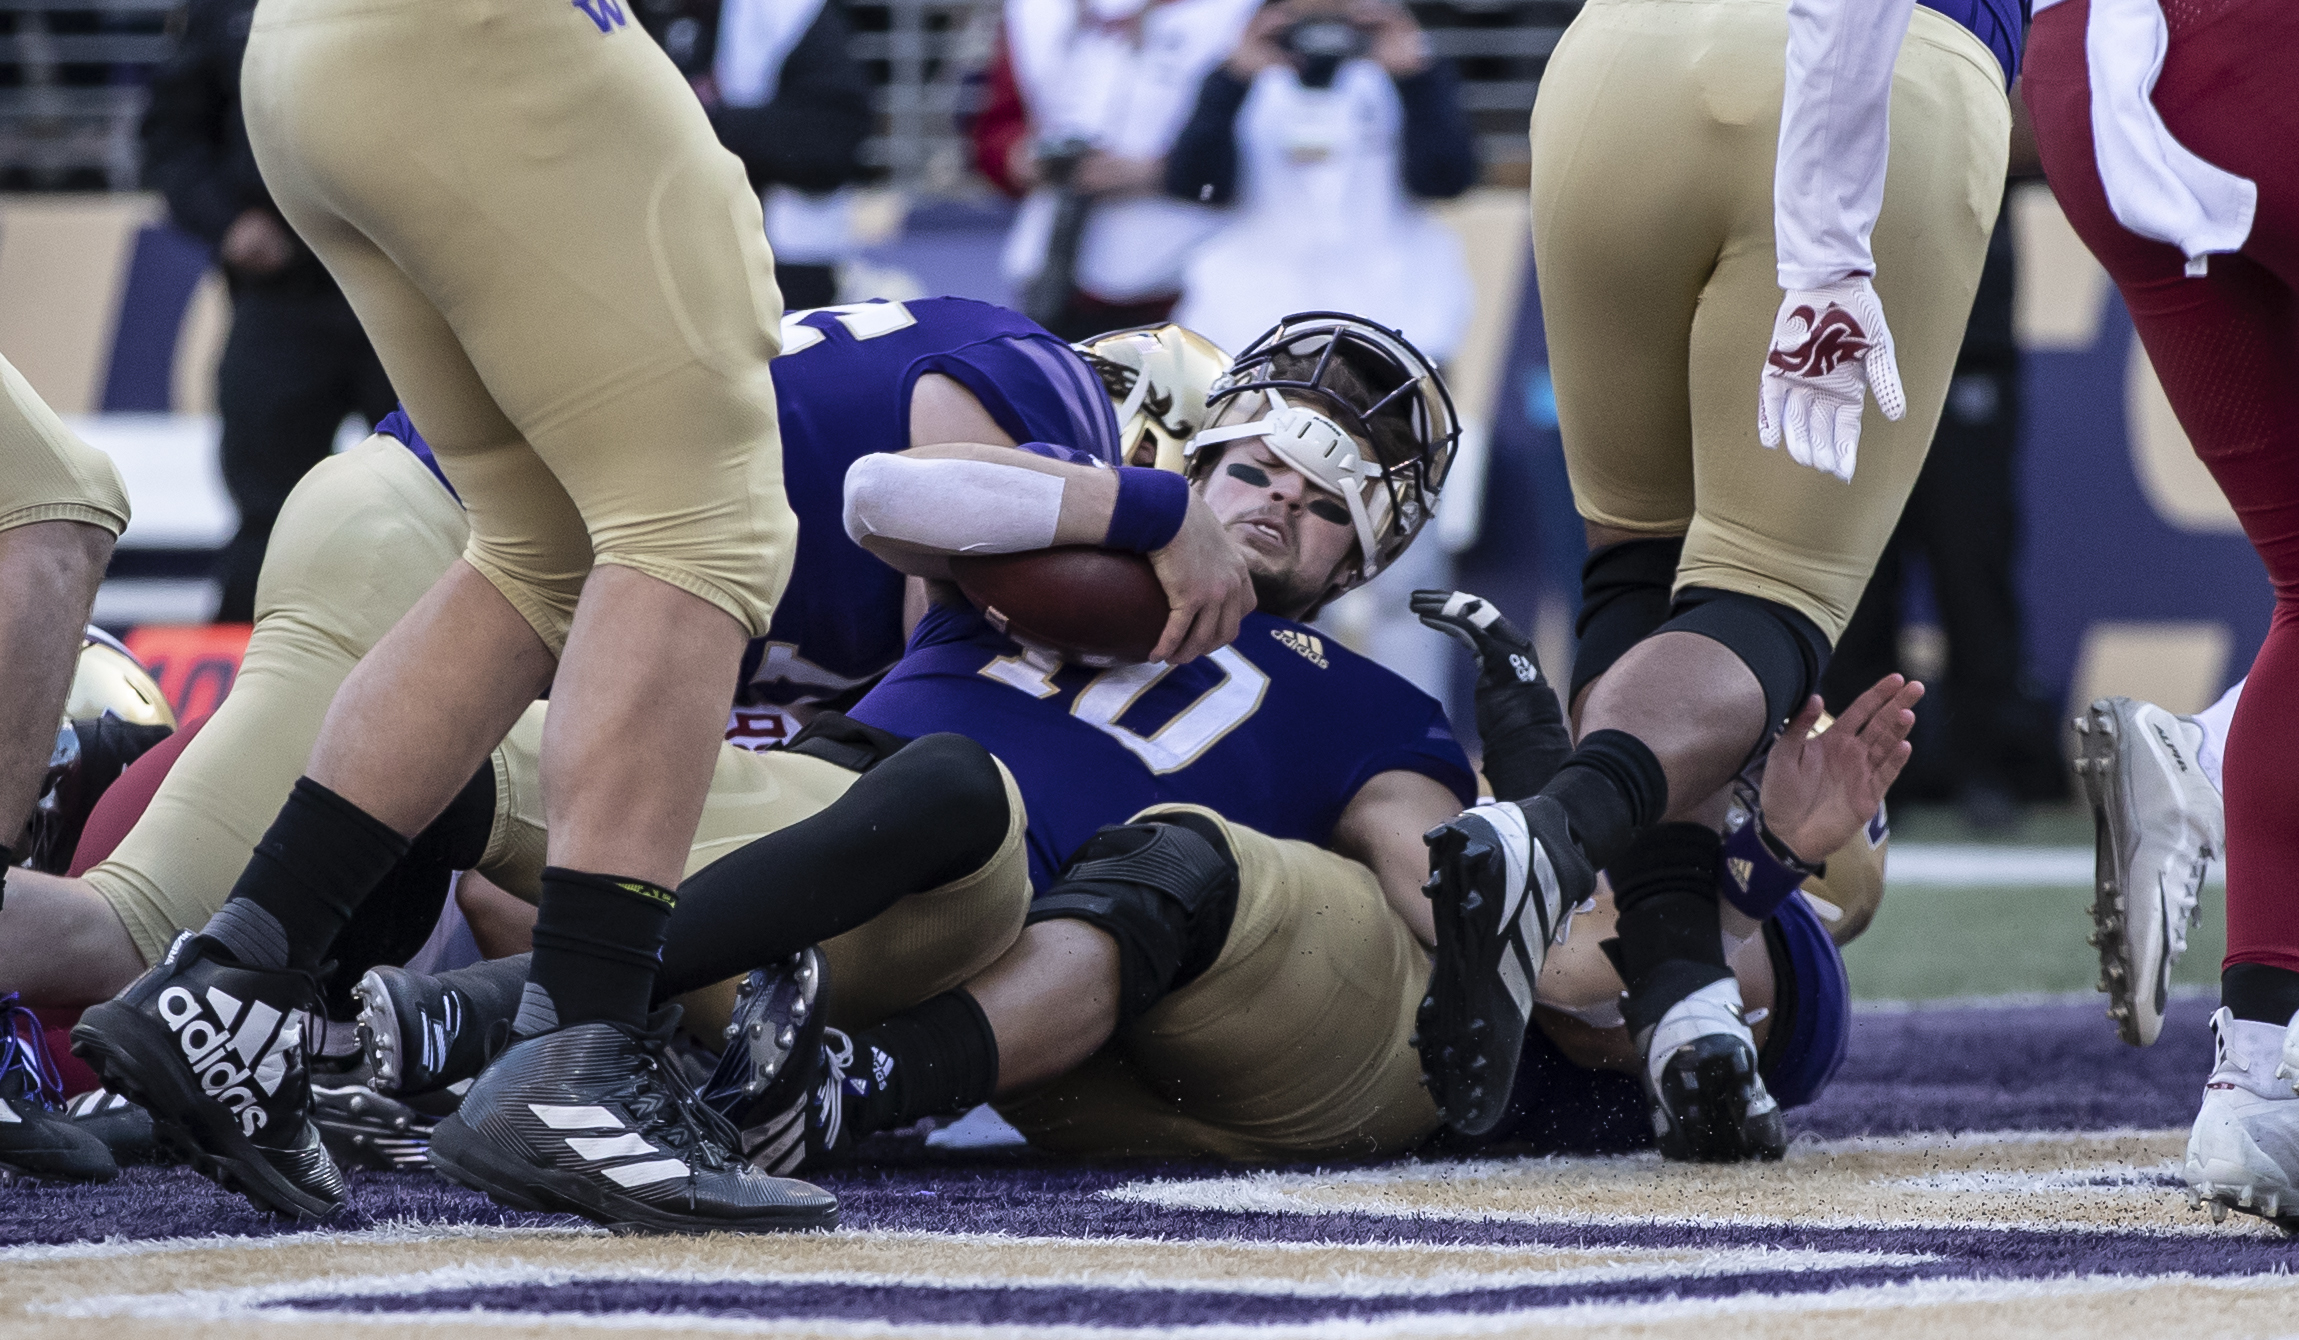 Apple Cup stays with Washington after 31-13 win over Wazzu